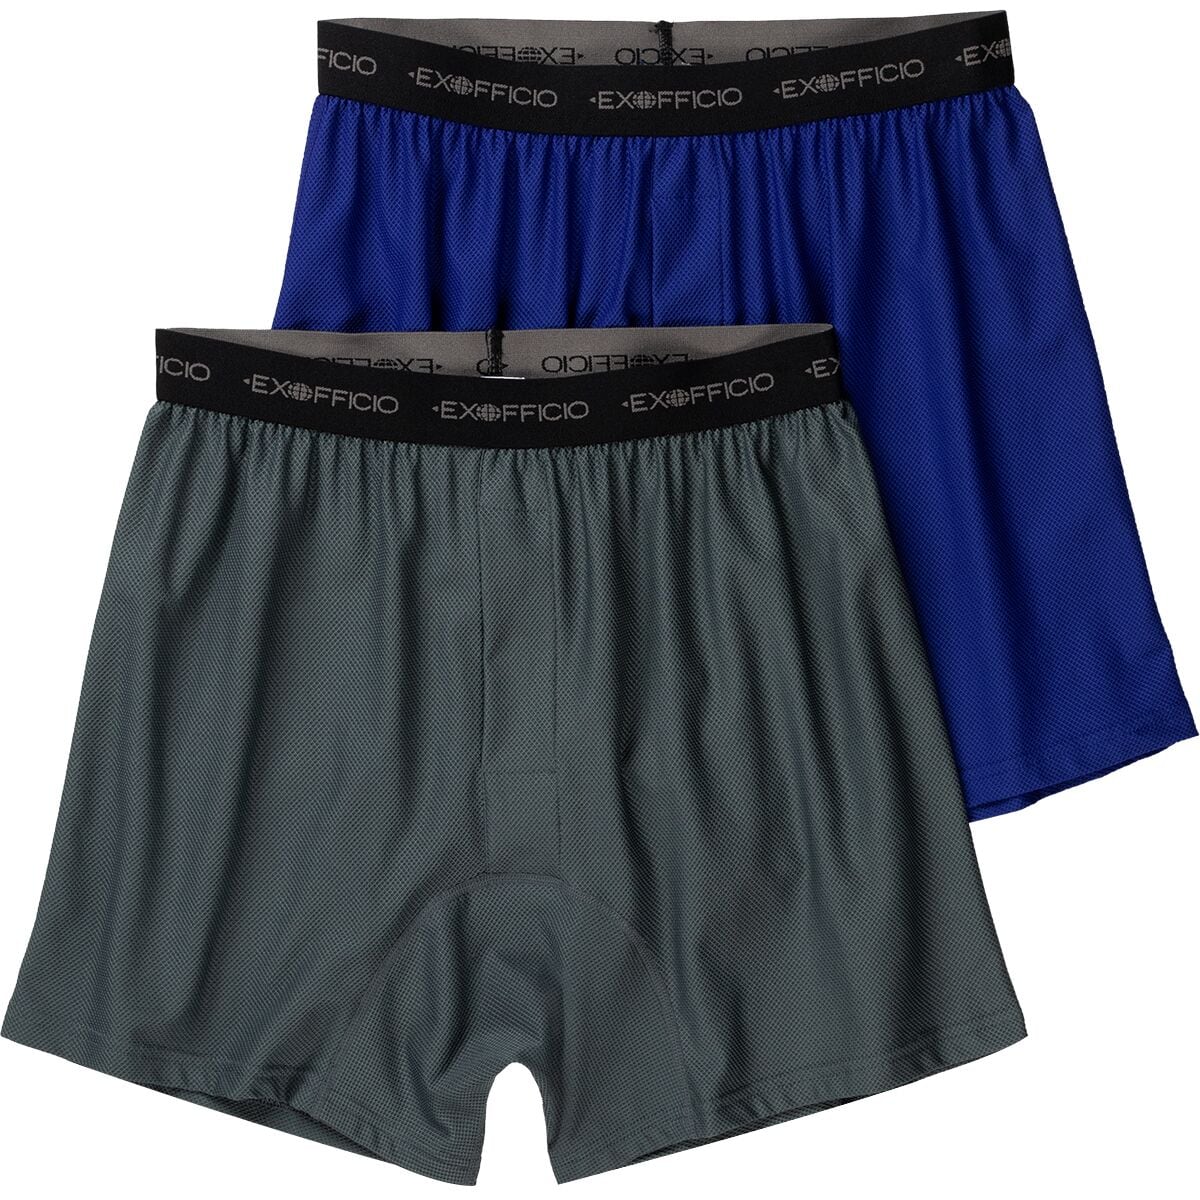 Steal Alert: ExOfficio Give-N-Go Boxer Brief 3 Pack for $21 – $30 at